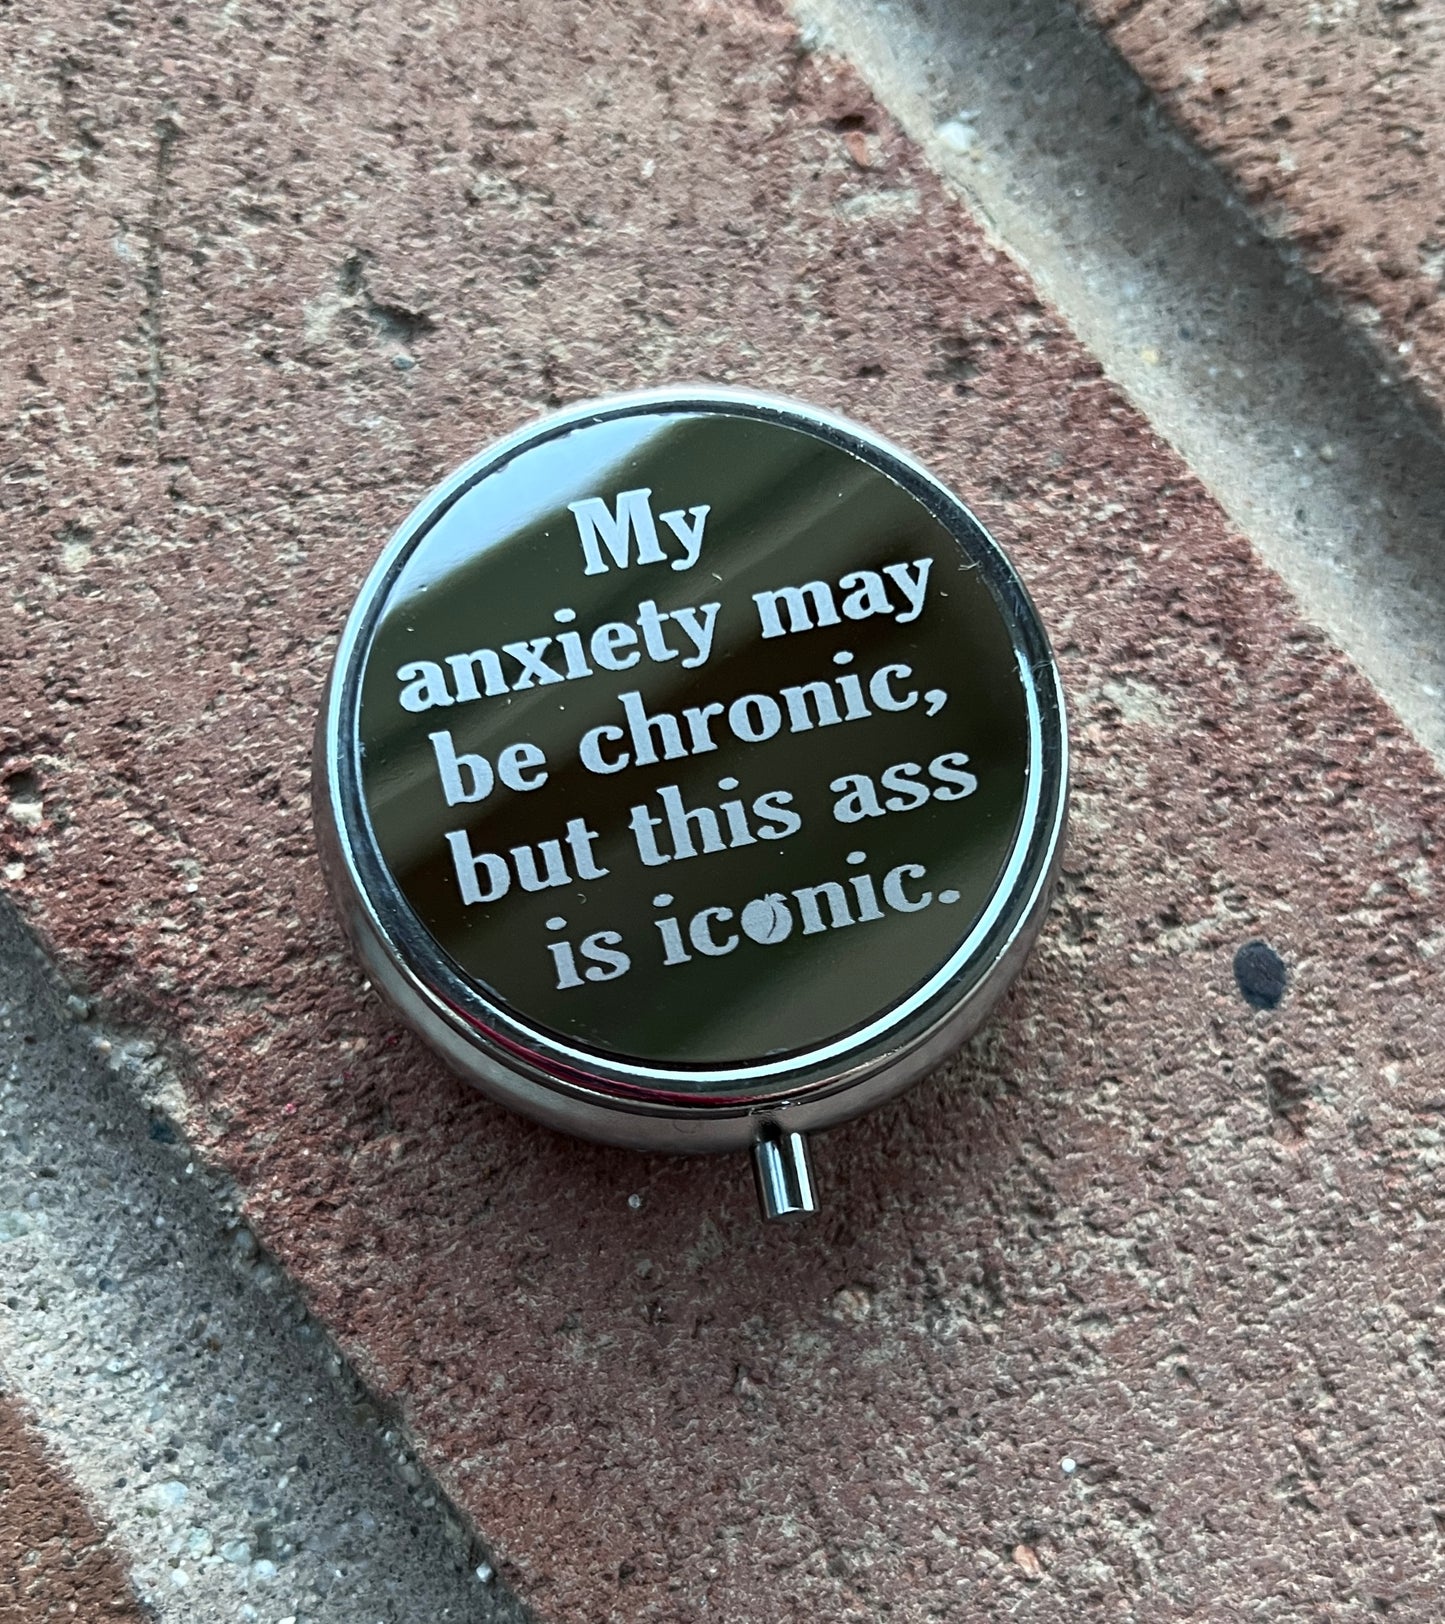 My anxiety may be chronic but this ass is iconic - Trinket | Medicine | Pill Box / Case